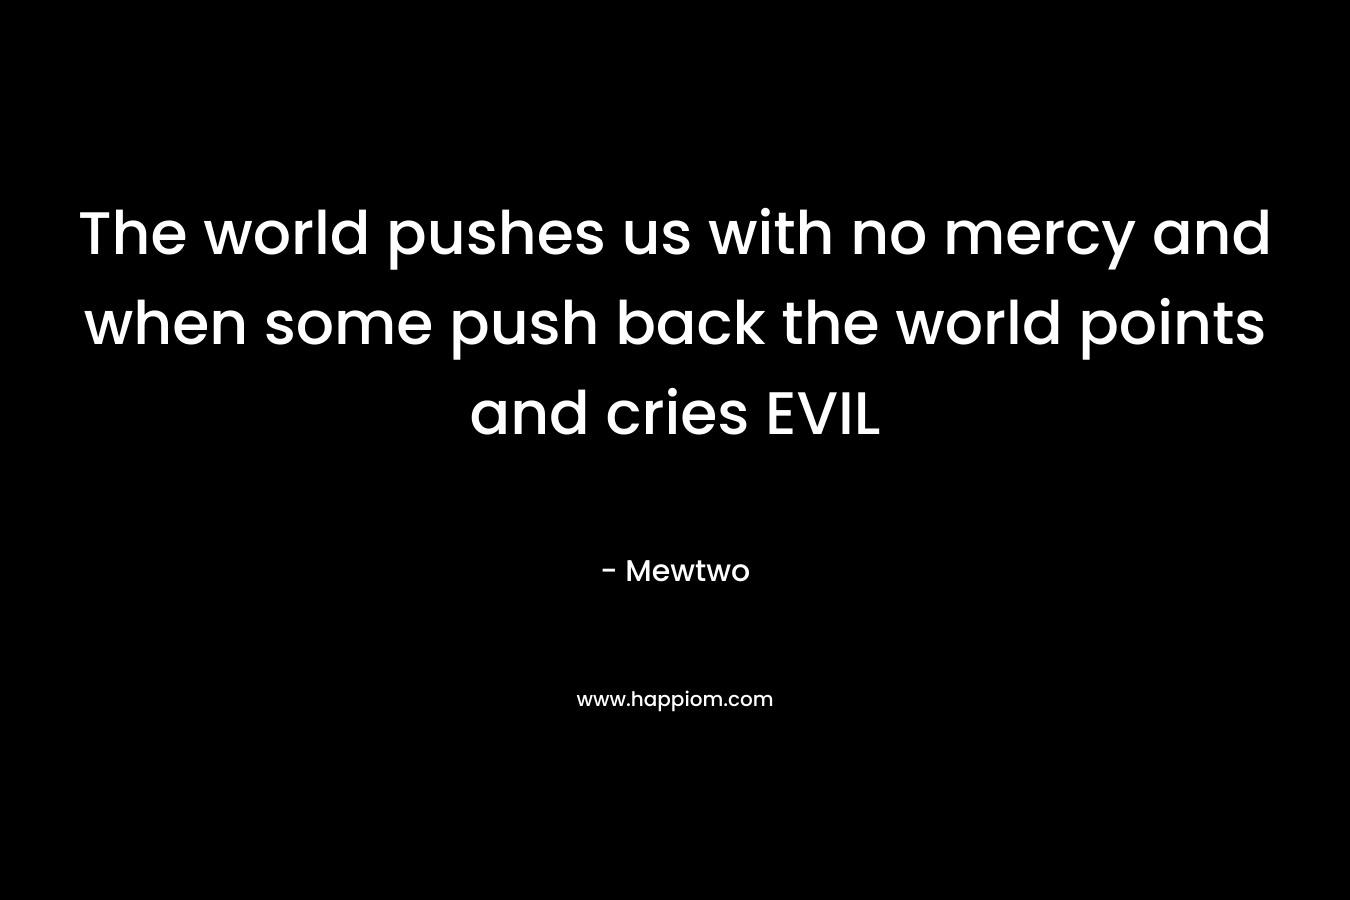 The world pushes us with no mercy and when some push back the world points and cries EVIL – Mewtwo